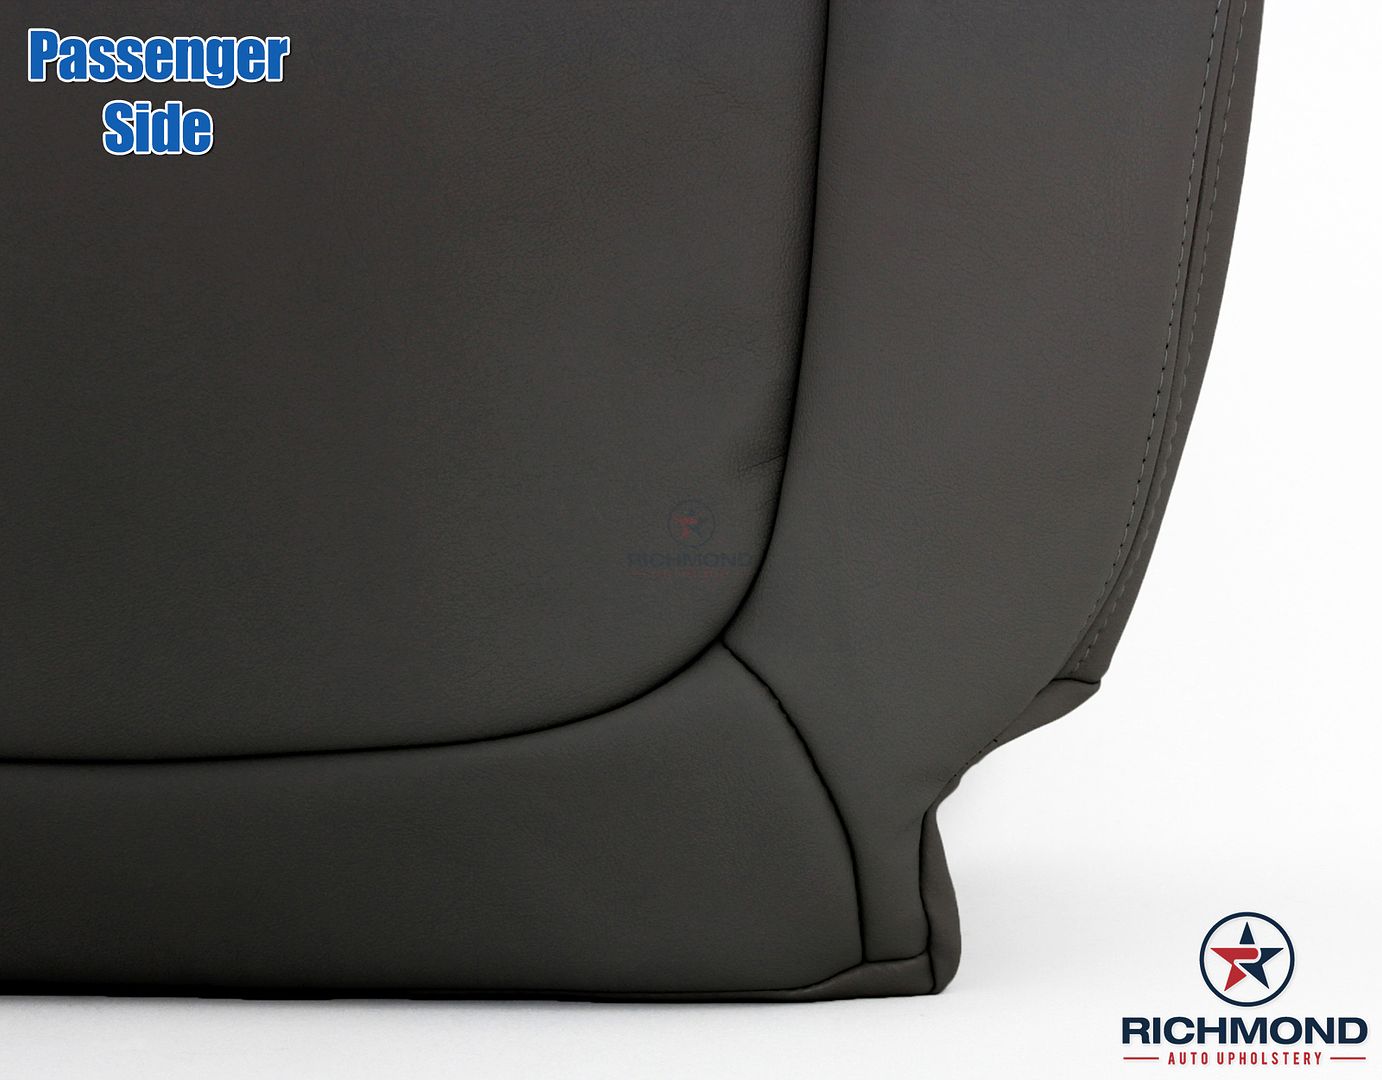 Details About 2007 2010 Saturn Outlook Xr Xe Passenger Side Bottom Leather Seat Cover Black